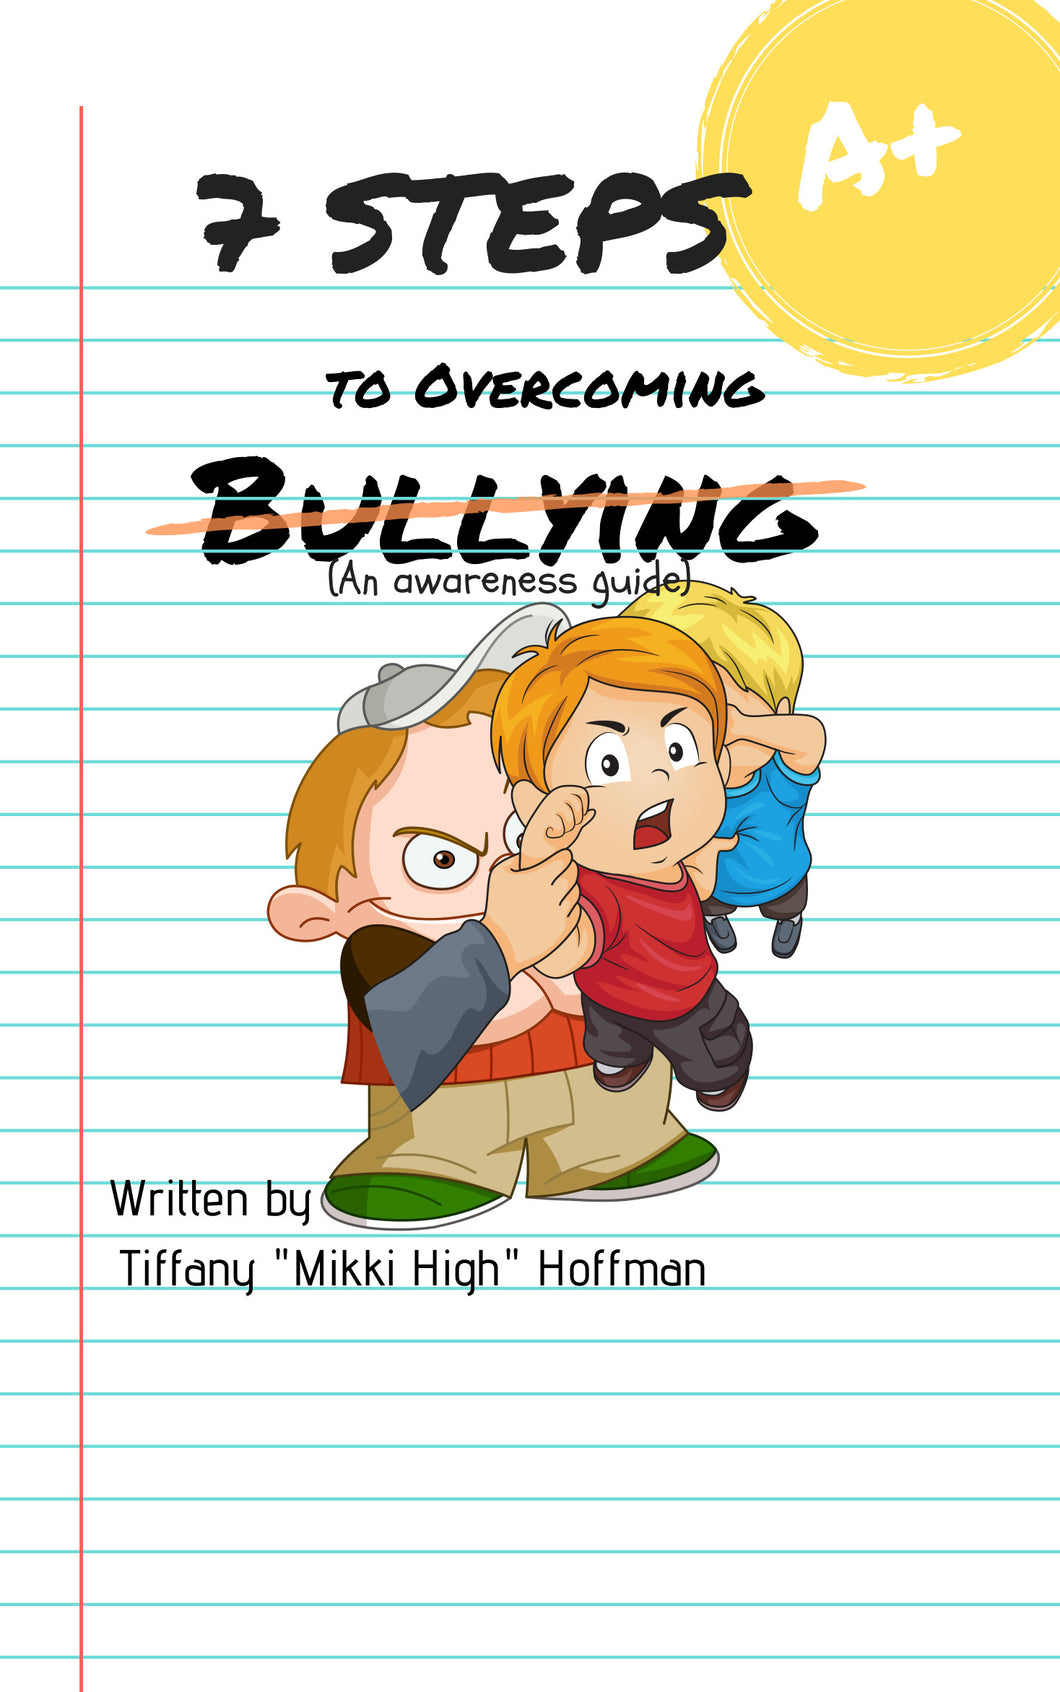 7 Steps to Overcoming Bullying